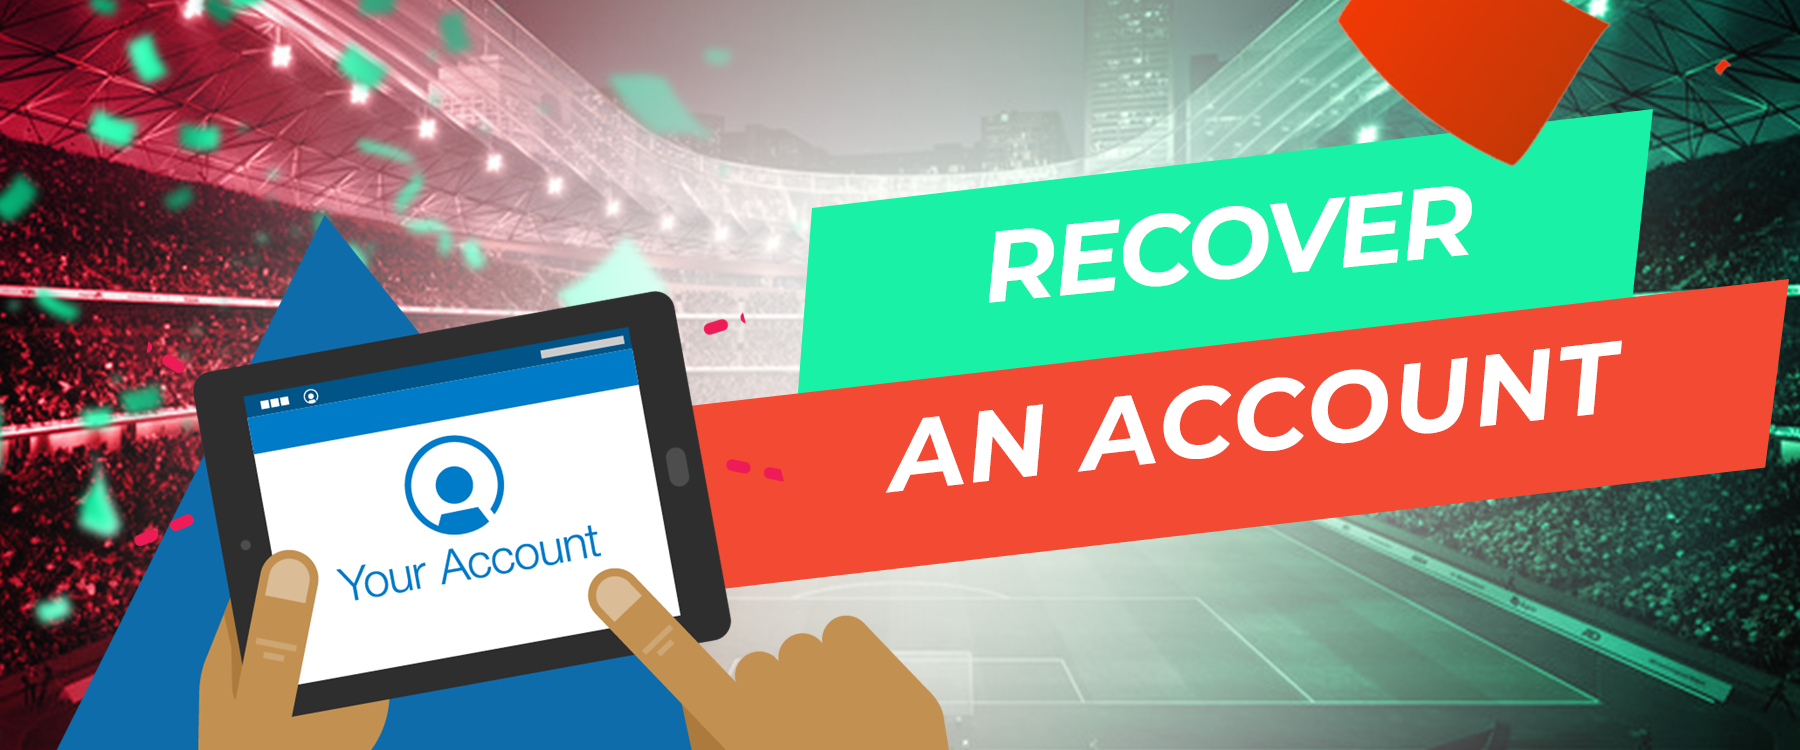 How to recover an account.